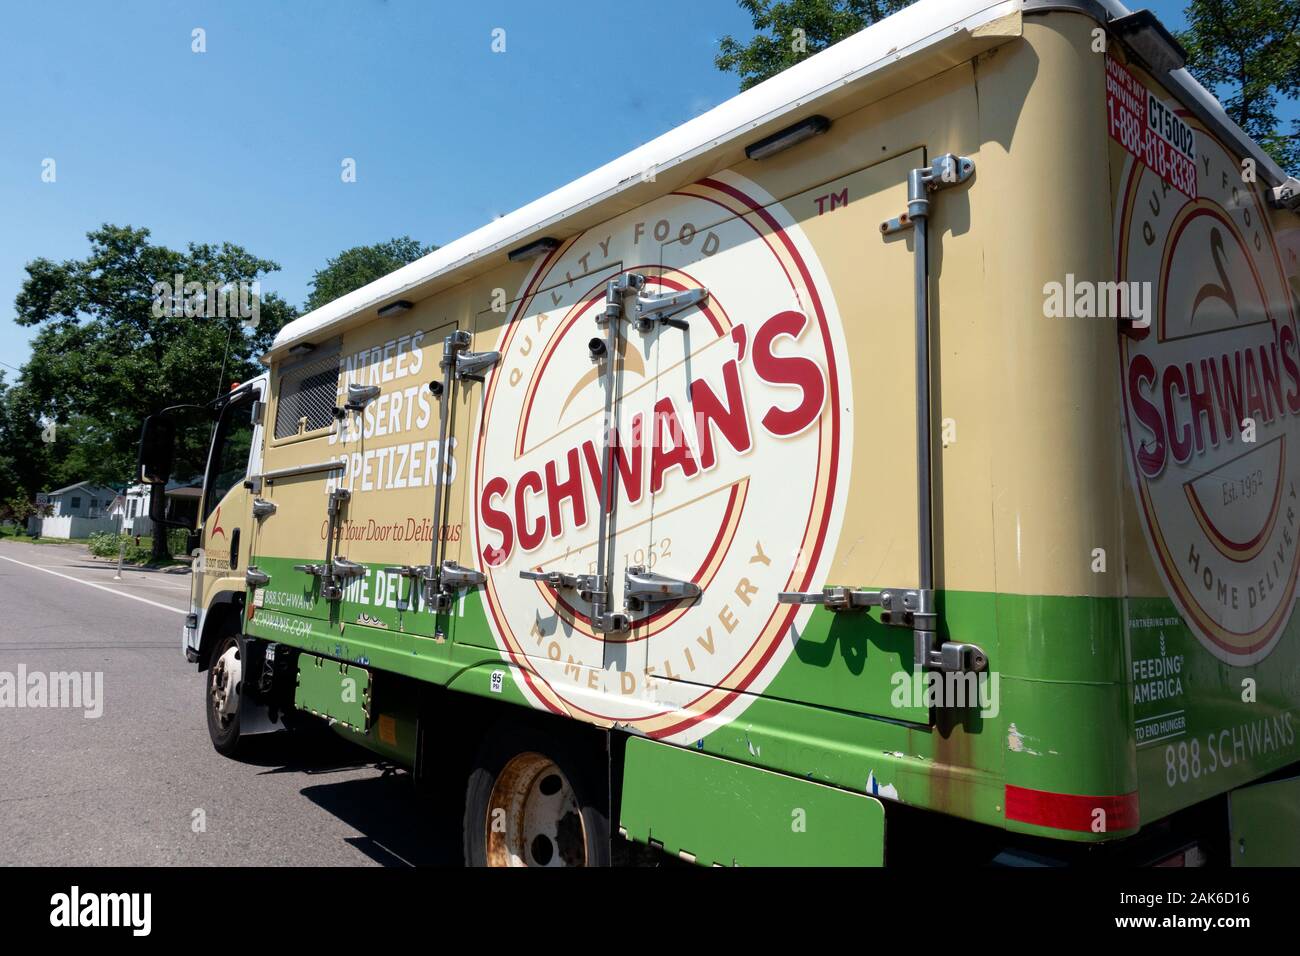 Schwans truck that delivers food to homes. Minneapolis Minnesota MN USA Stock Photo